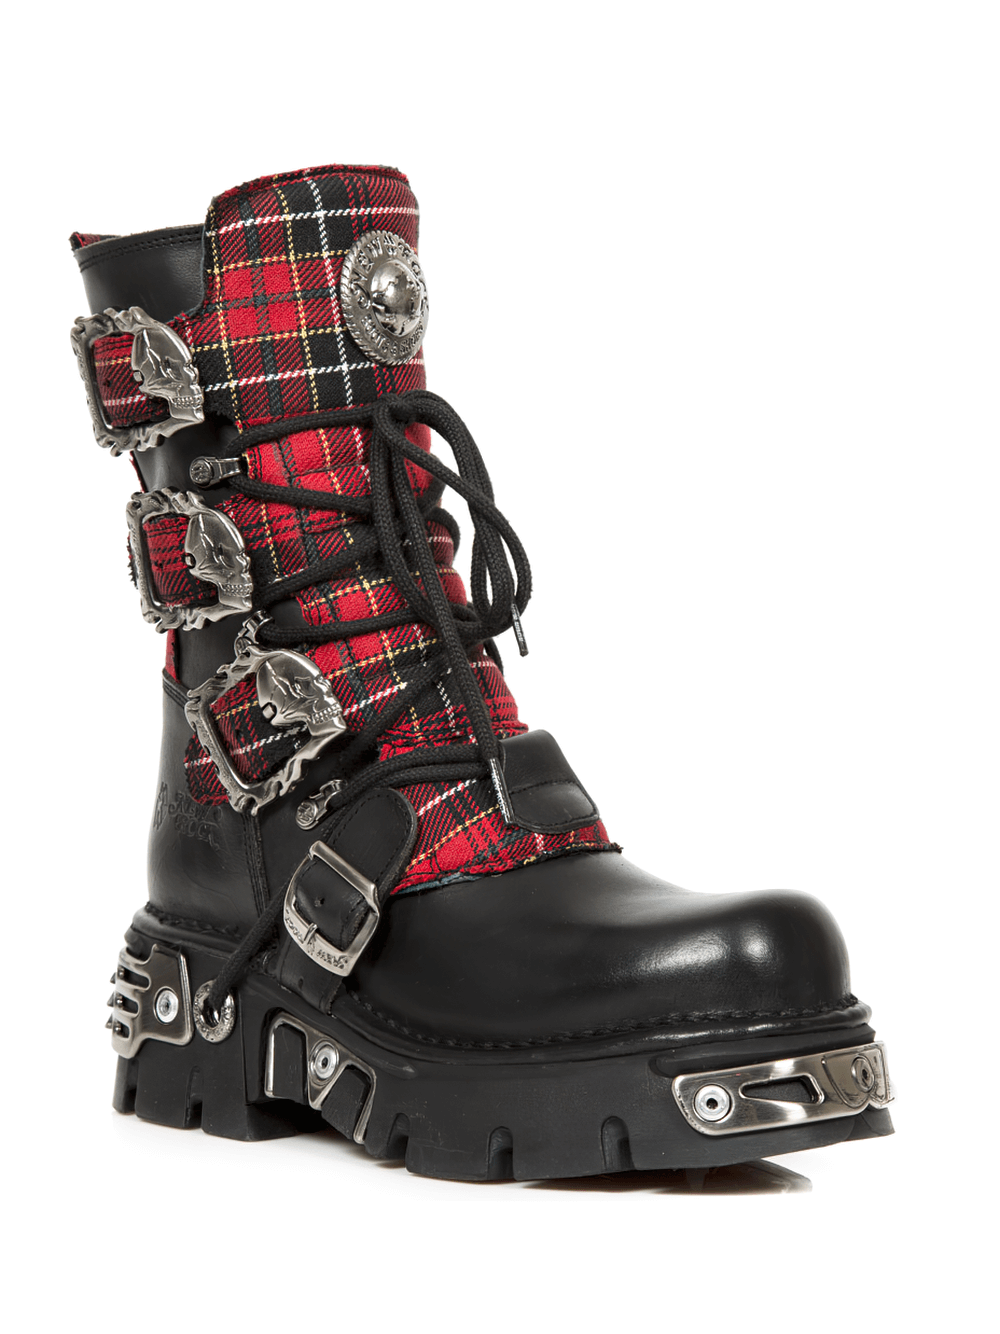 NEW ROCK Gothic Punk Plaid Boots with Metal Accents